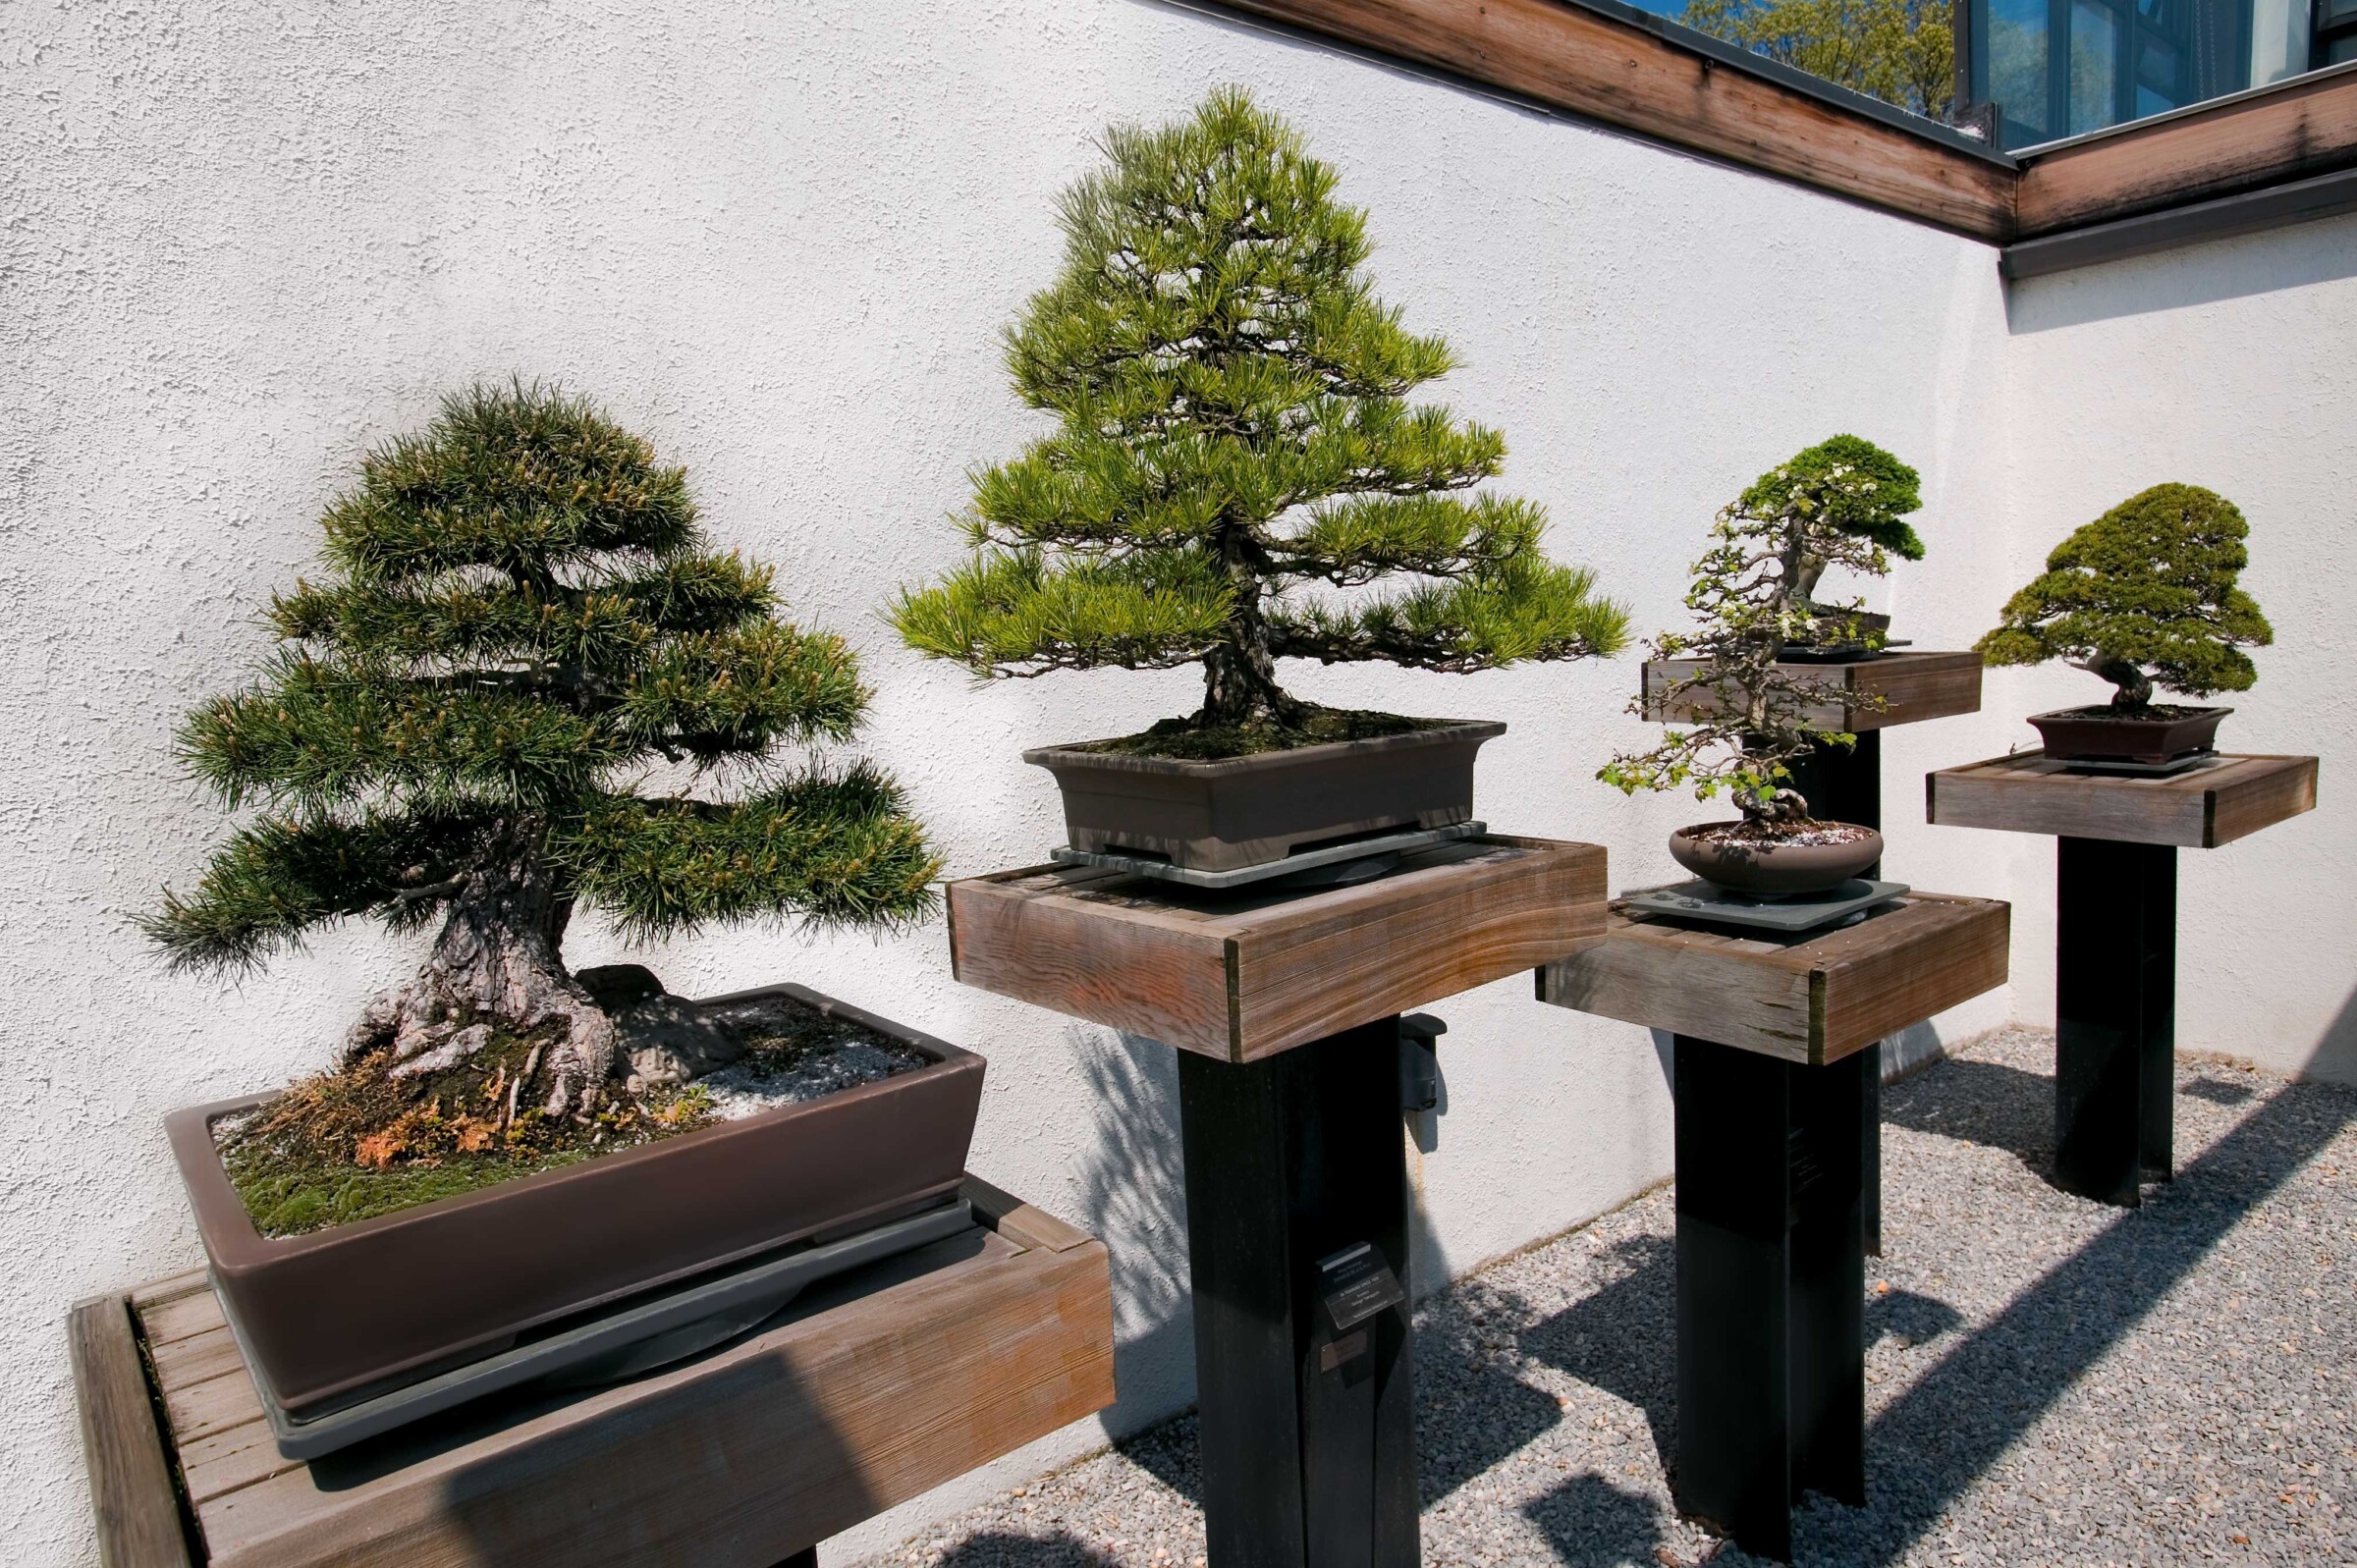 The once so exotic-looking bonsai has meanwhile found aficionados all over the world.